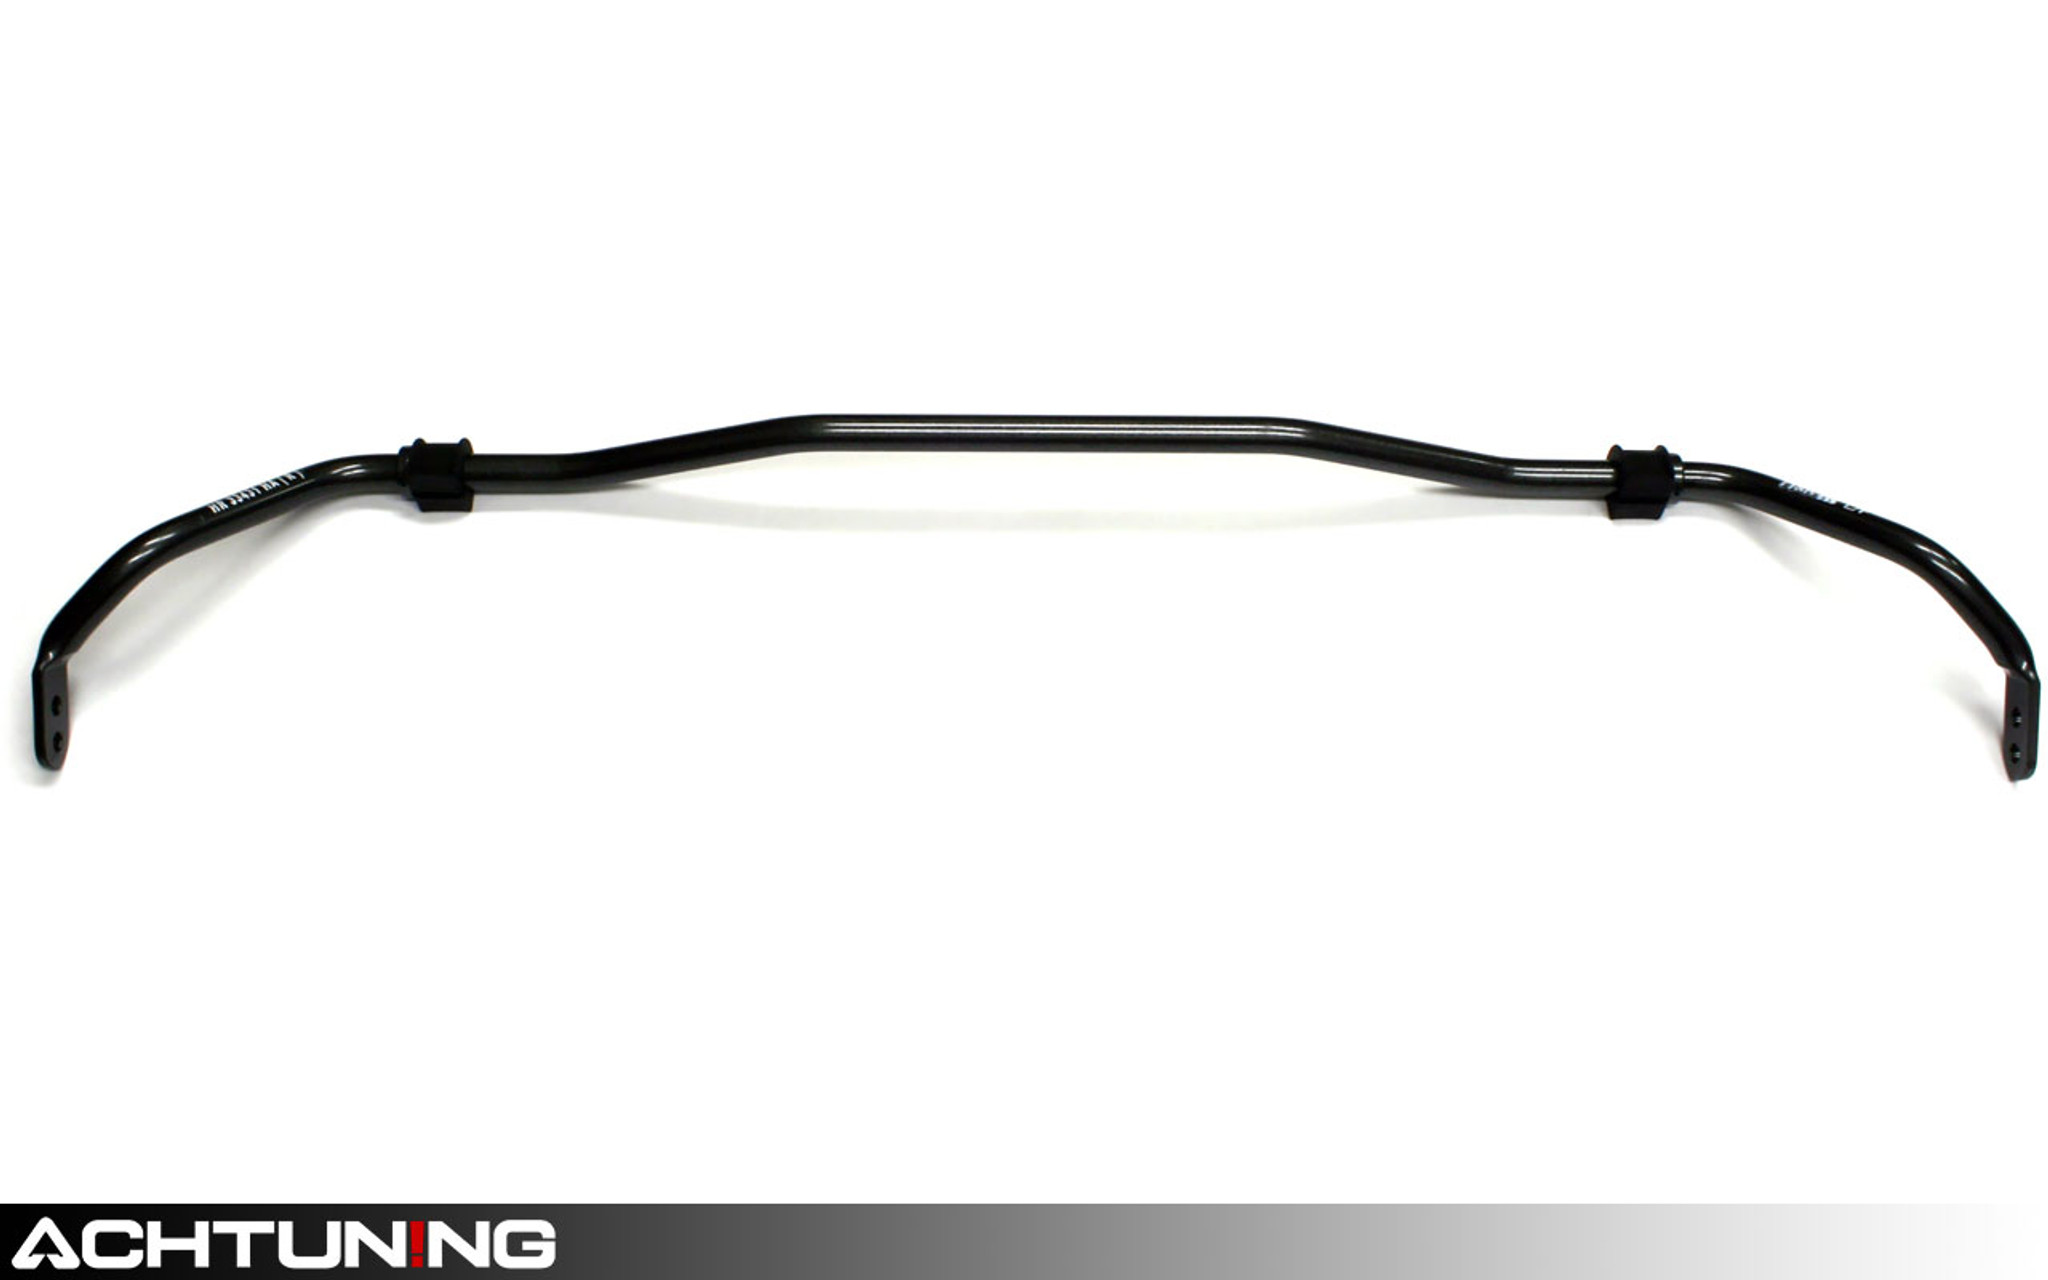 H&R 72312 Front and Rear Sway Bar Kit Audi Mk1 TT Quattro - Achtuning